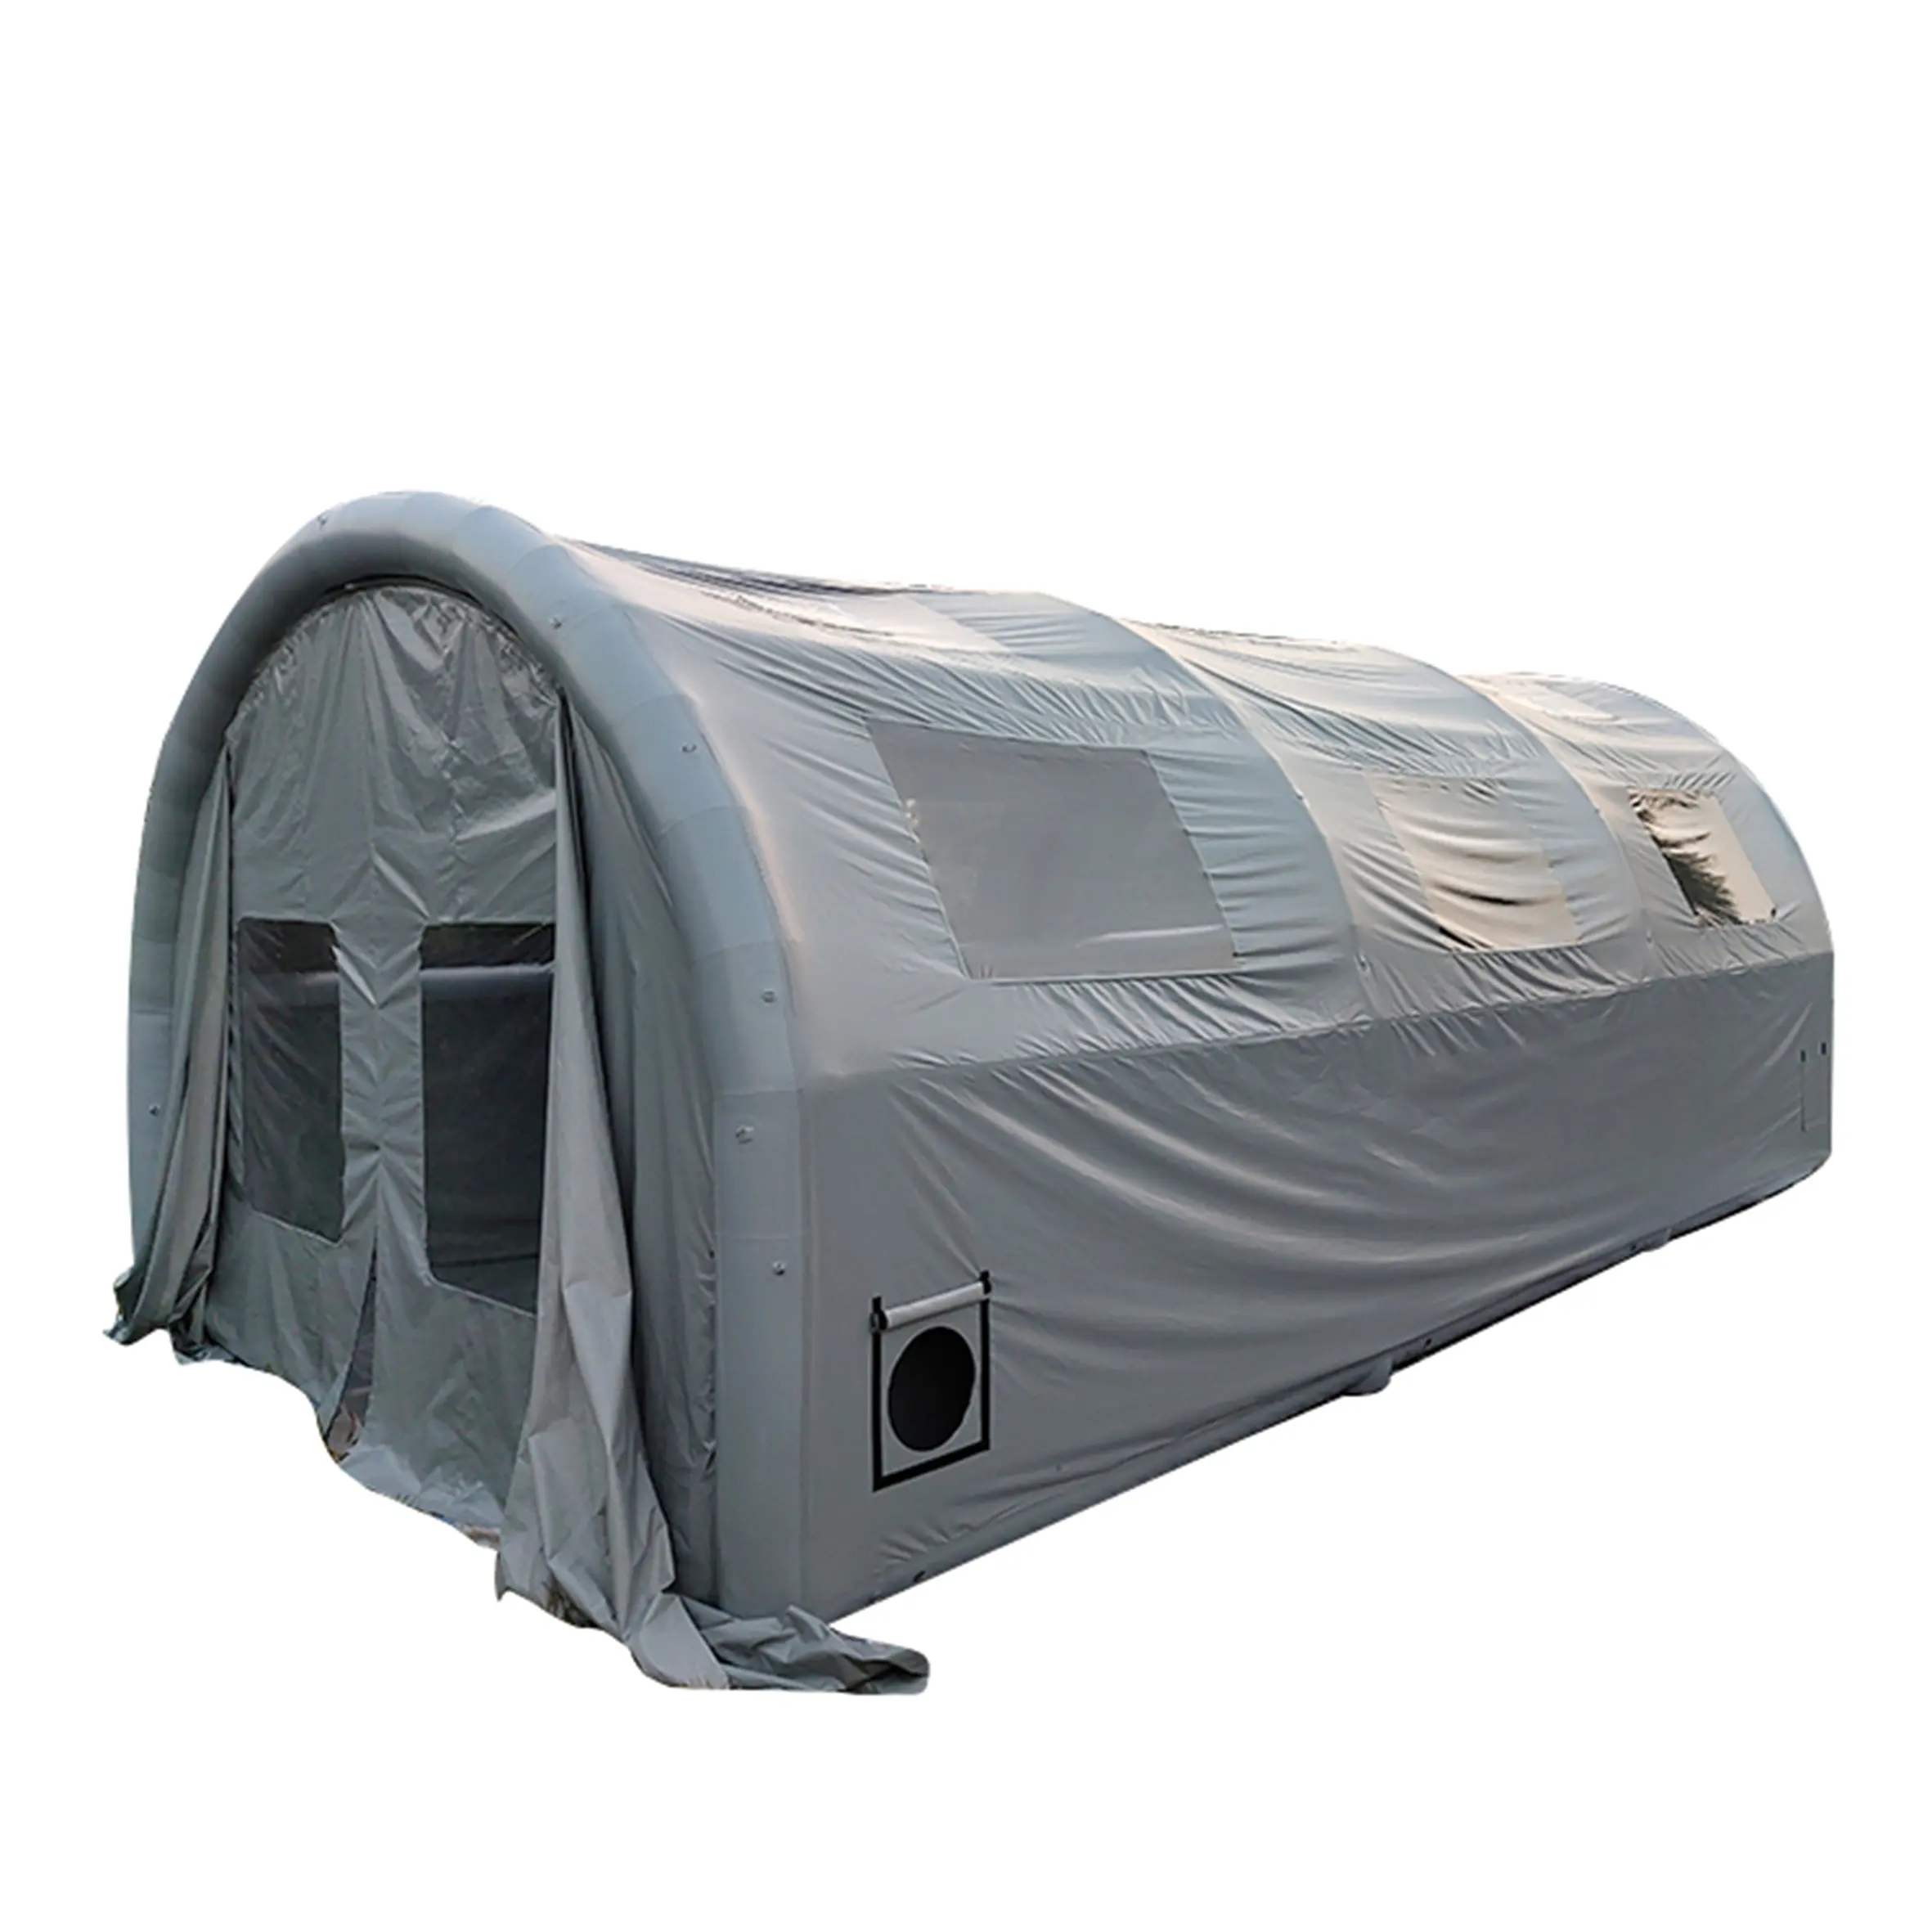 Factory Sell Oxford Canvas Waterproof Rescue Outdoor Camping,Disaster Relief Tents Refugee Tents Emergency Relief Tents/